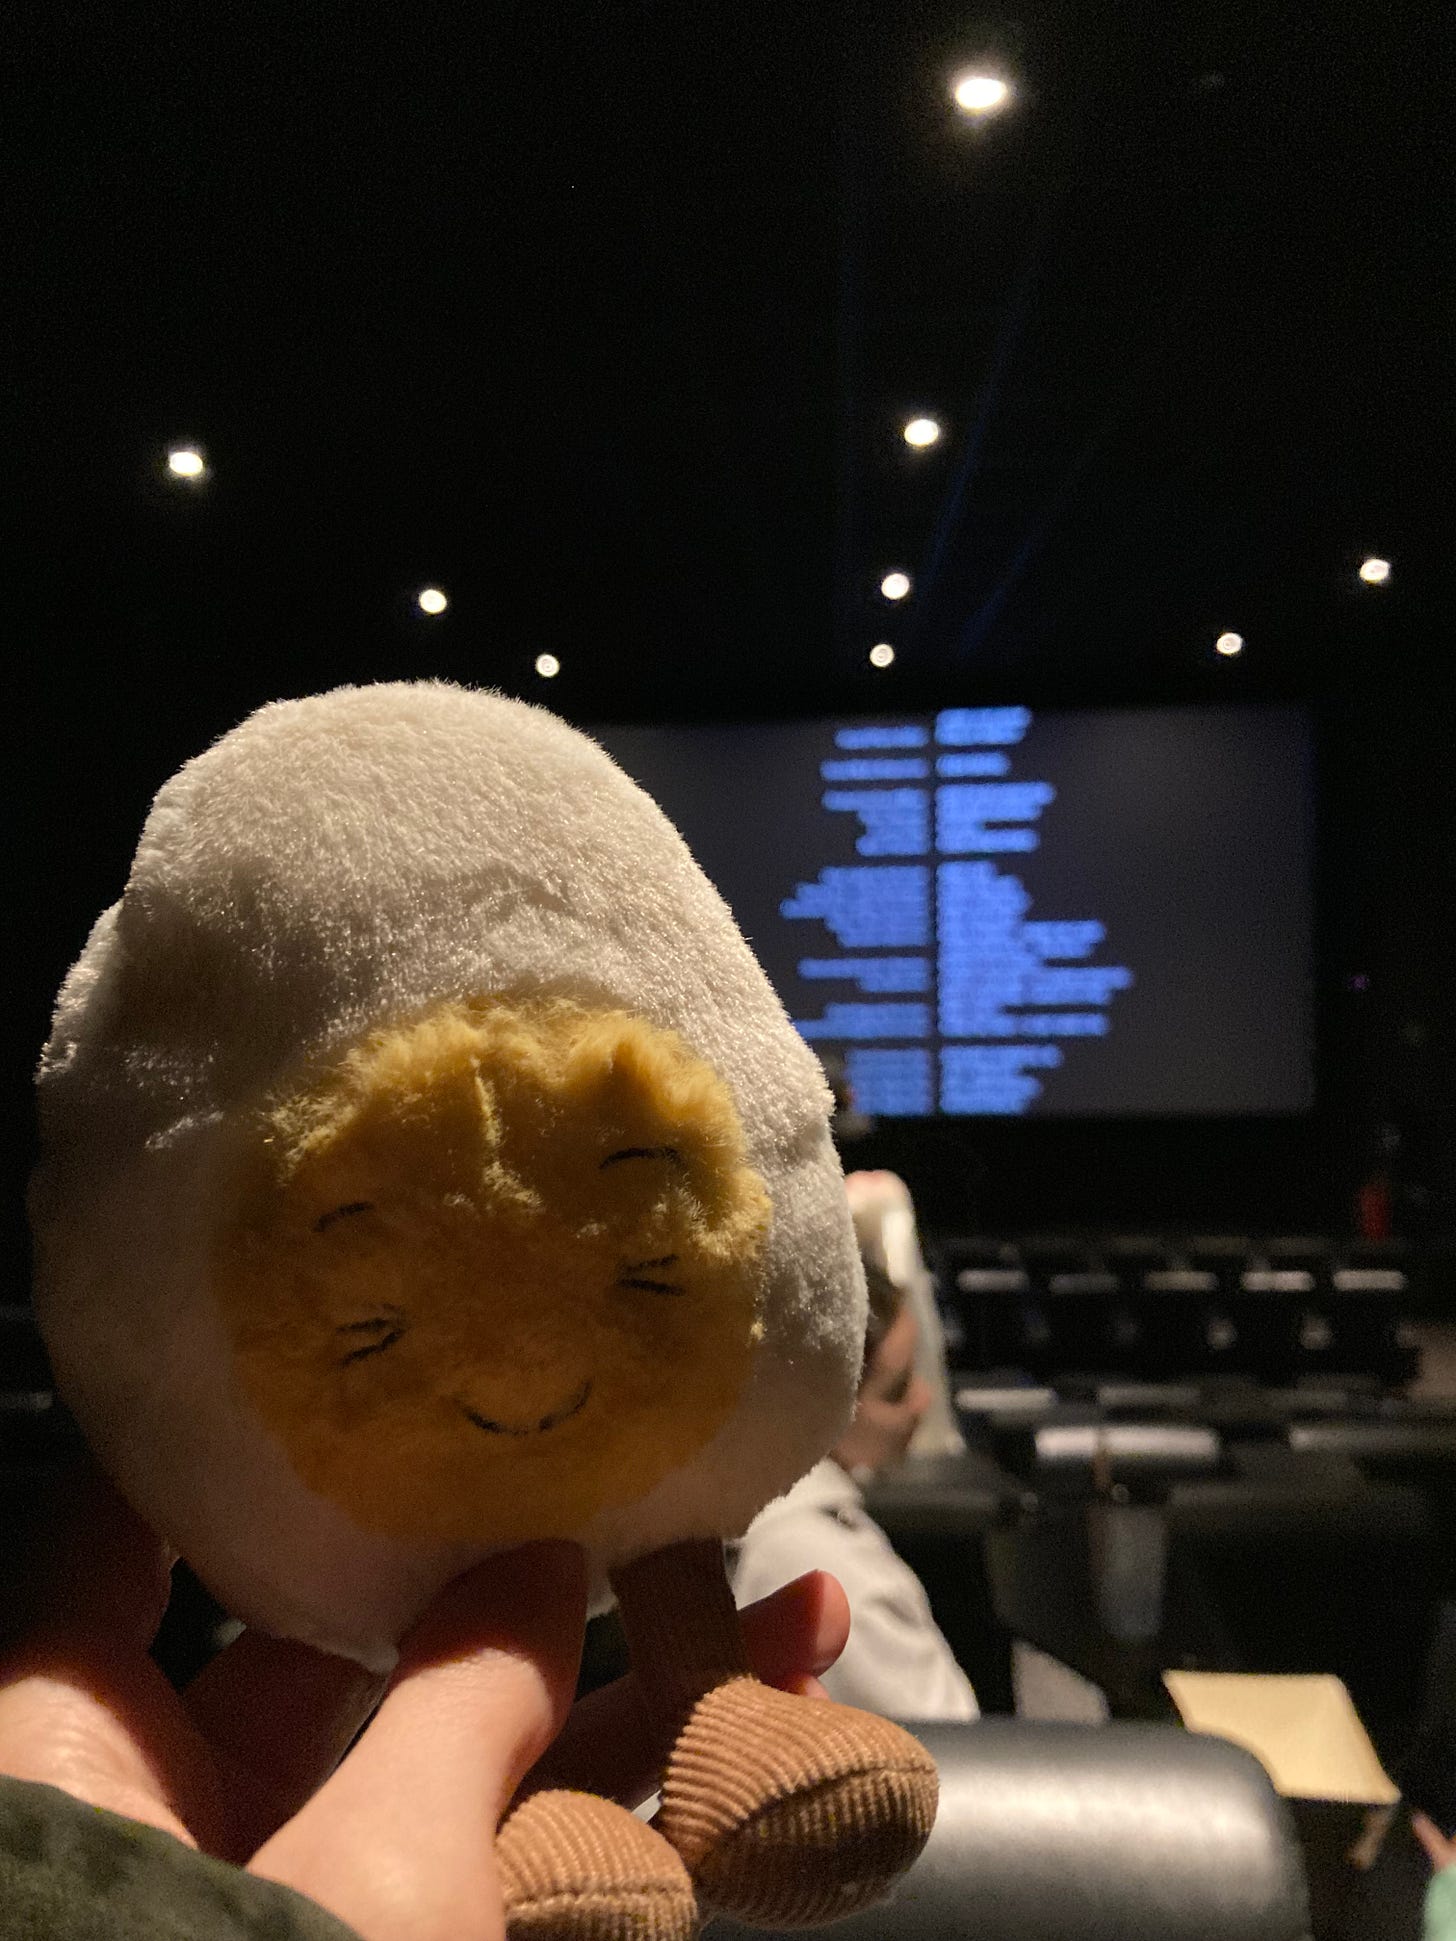 photograph of Dippy the soft toy egg in a dark cinema as credits roll in the background on the big screen